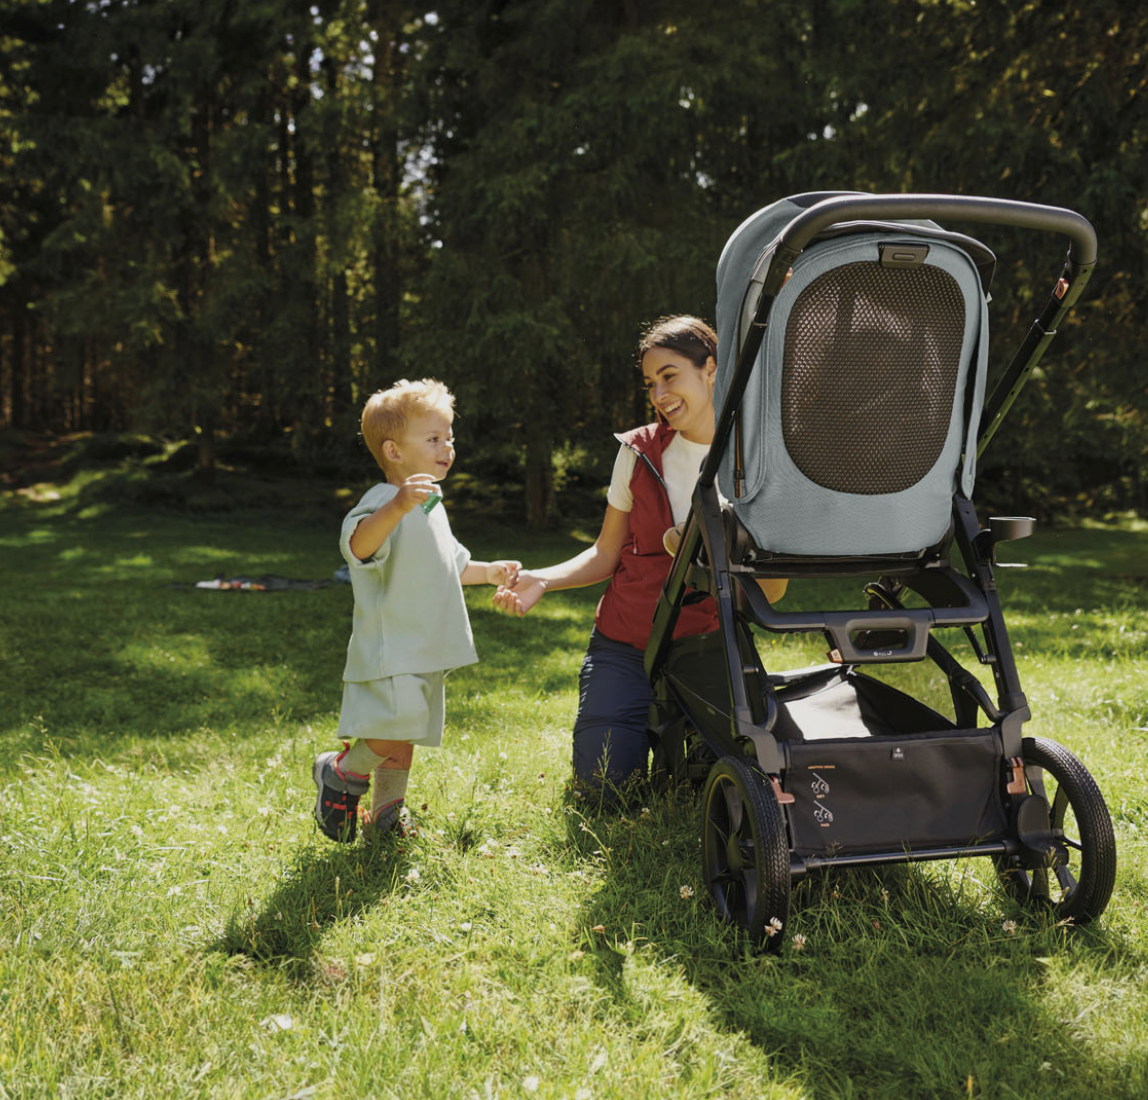 Inglesina Aptica XT All terrain Pram and Pushchair set - perfect for an outdoor lifestyle - Land of Little